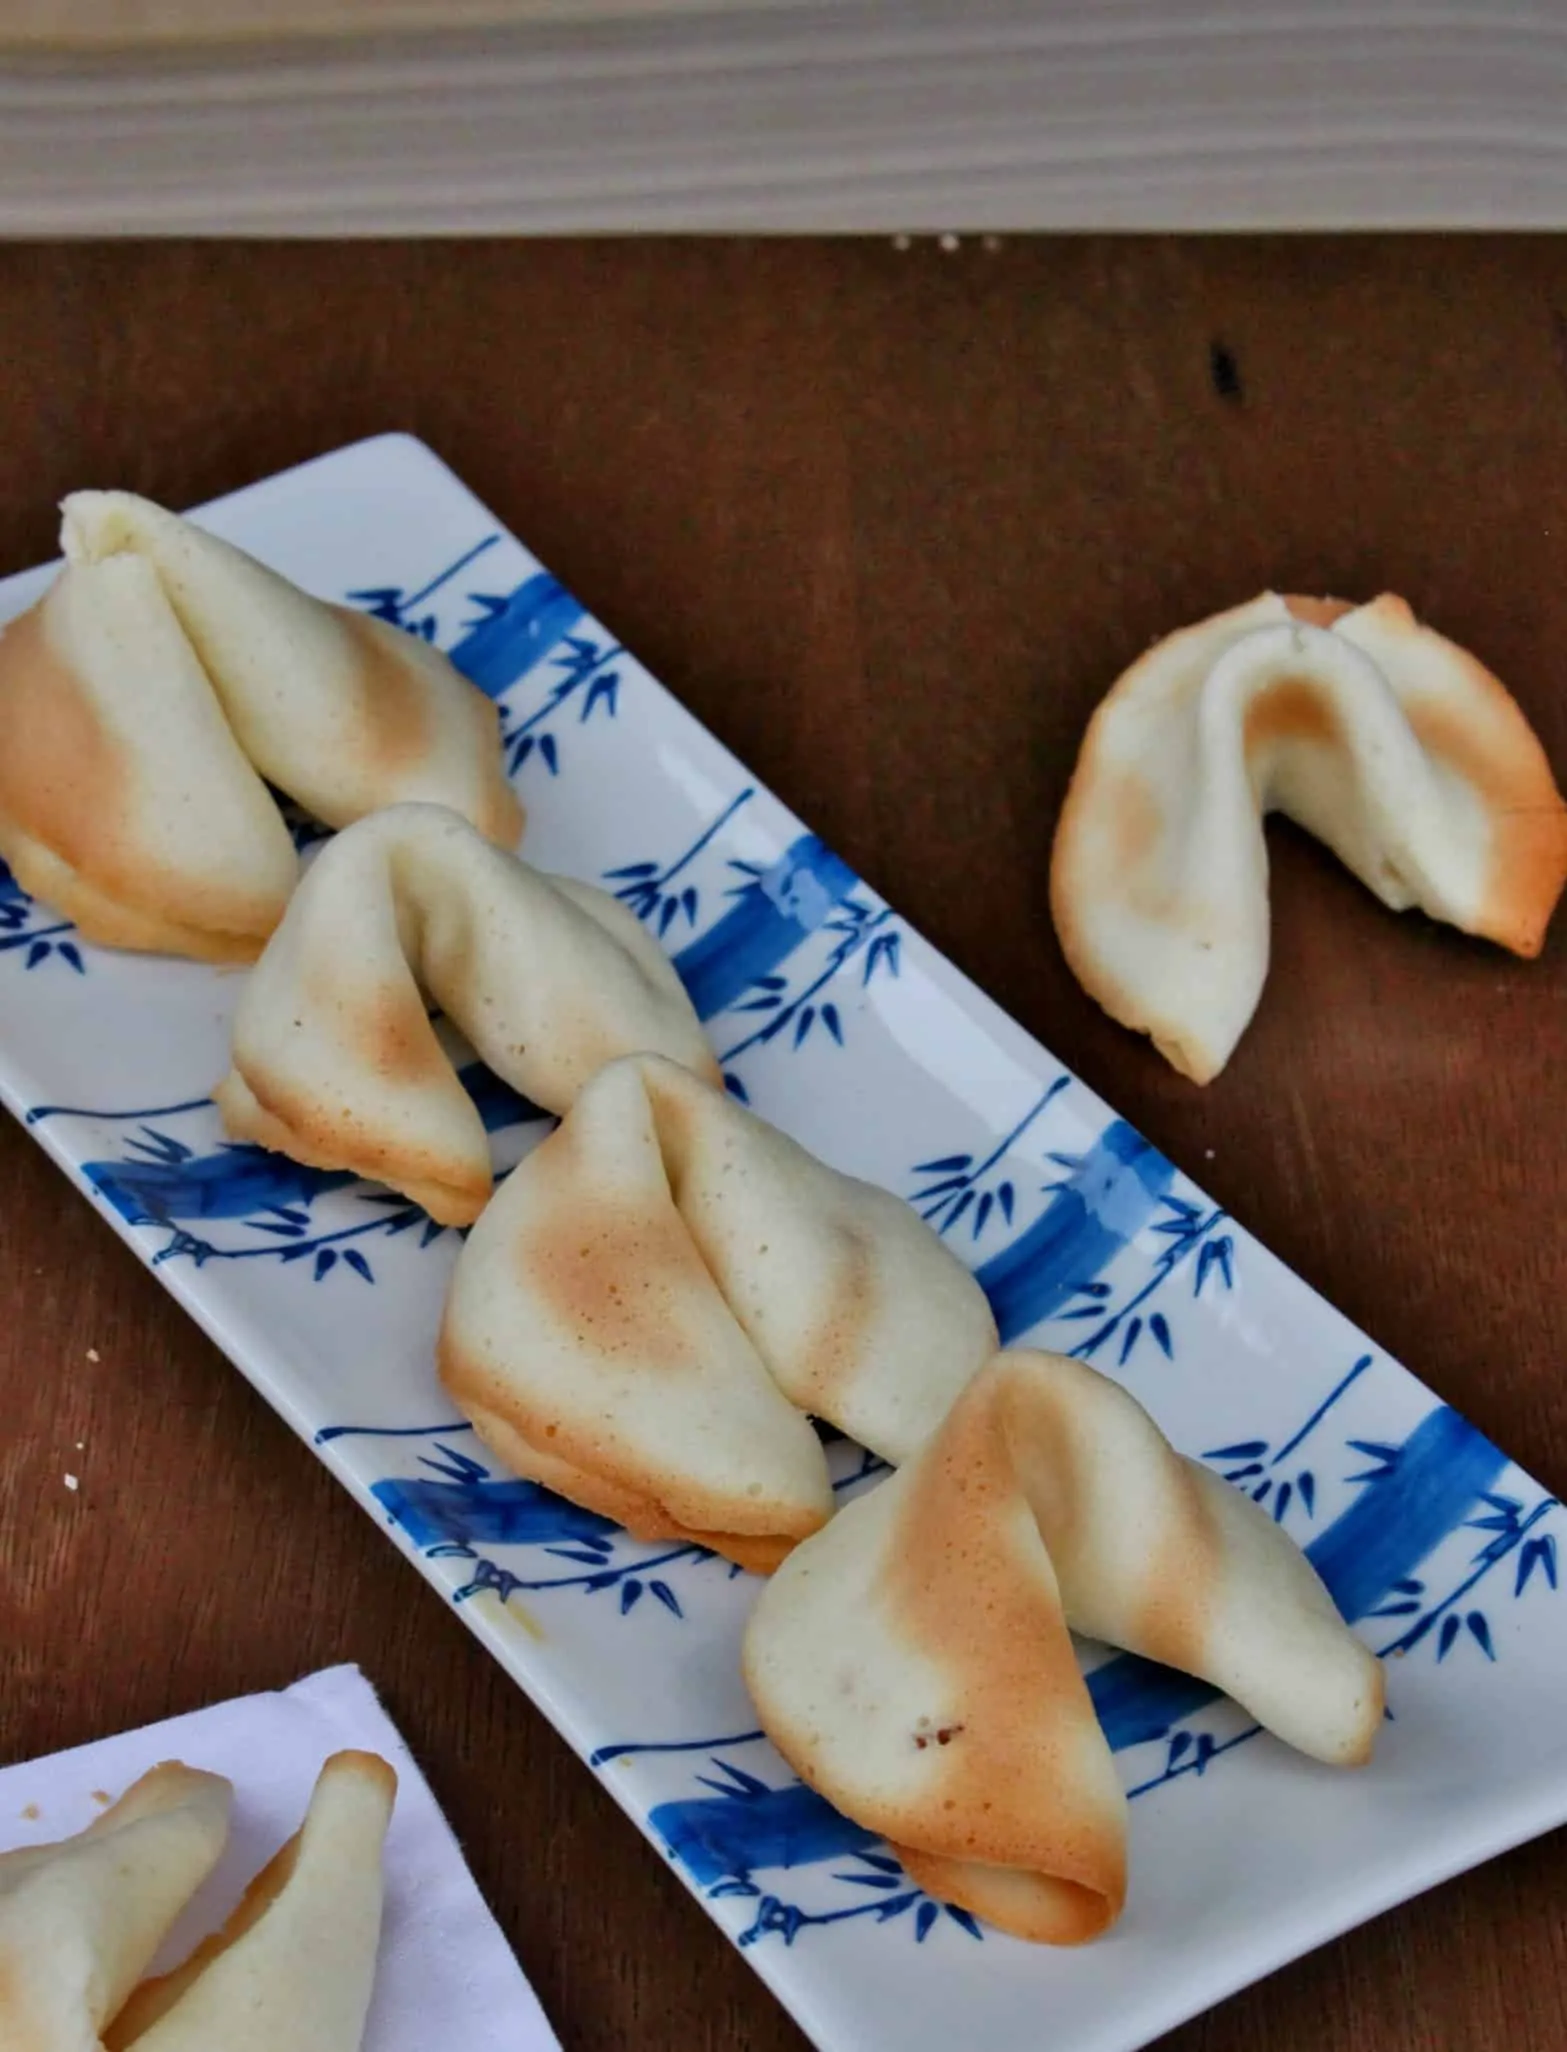 Homemade Fortune Cookies in a blue tray